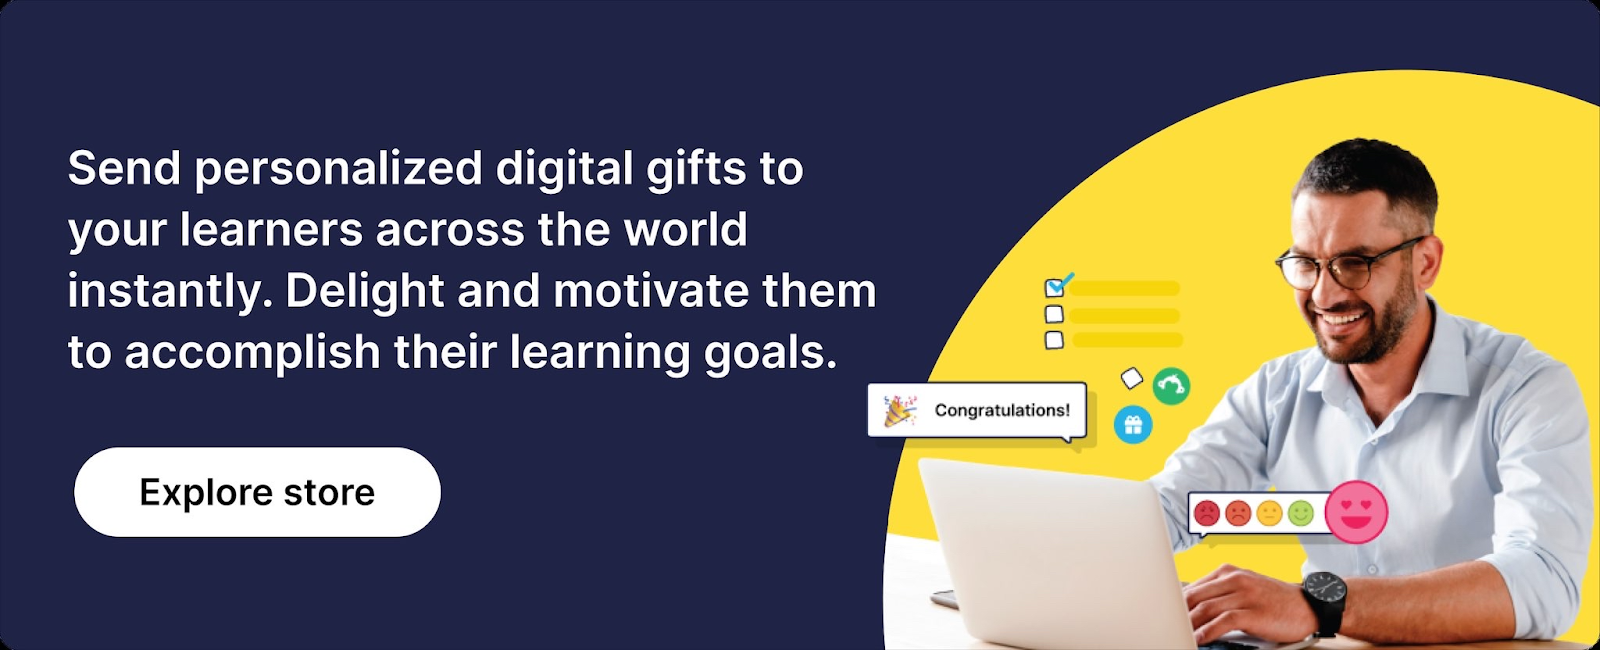 sending personalized digiftal gifts for learners